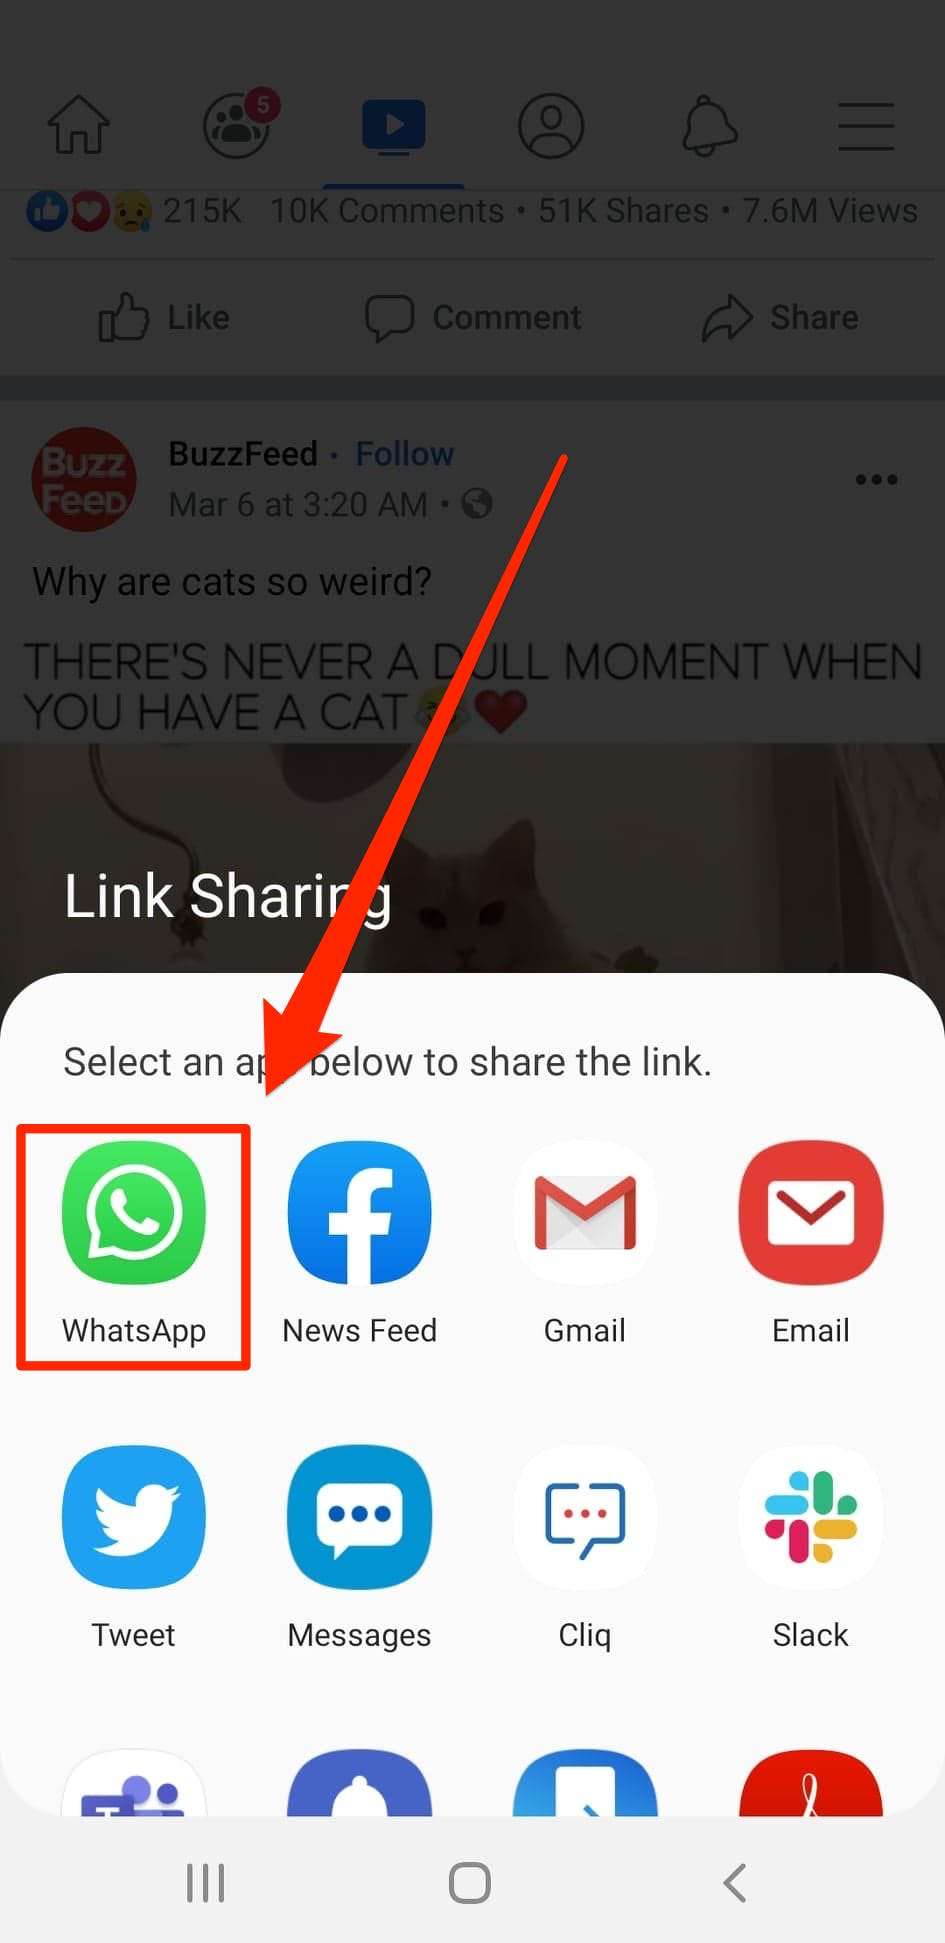 How to share Facebook videos on WhatsApp by sending a direct link to your contacts